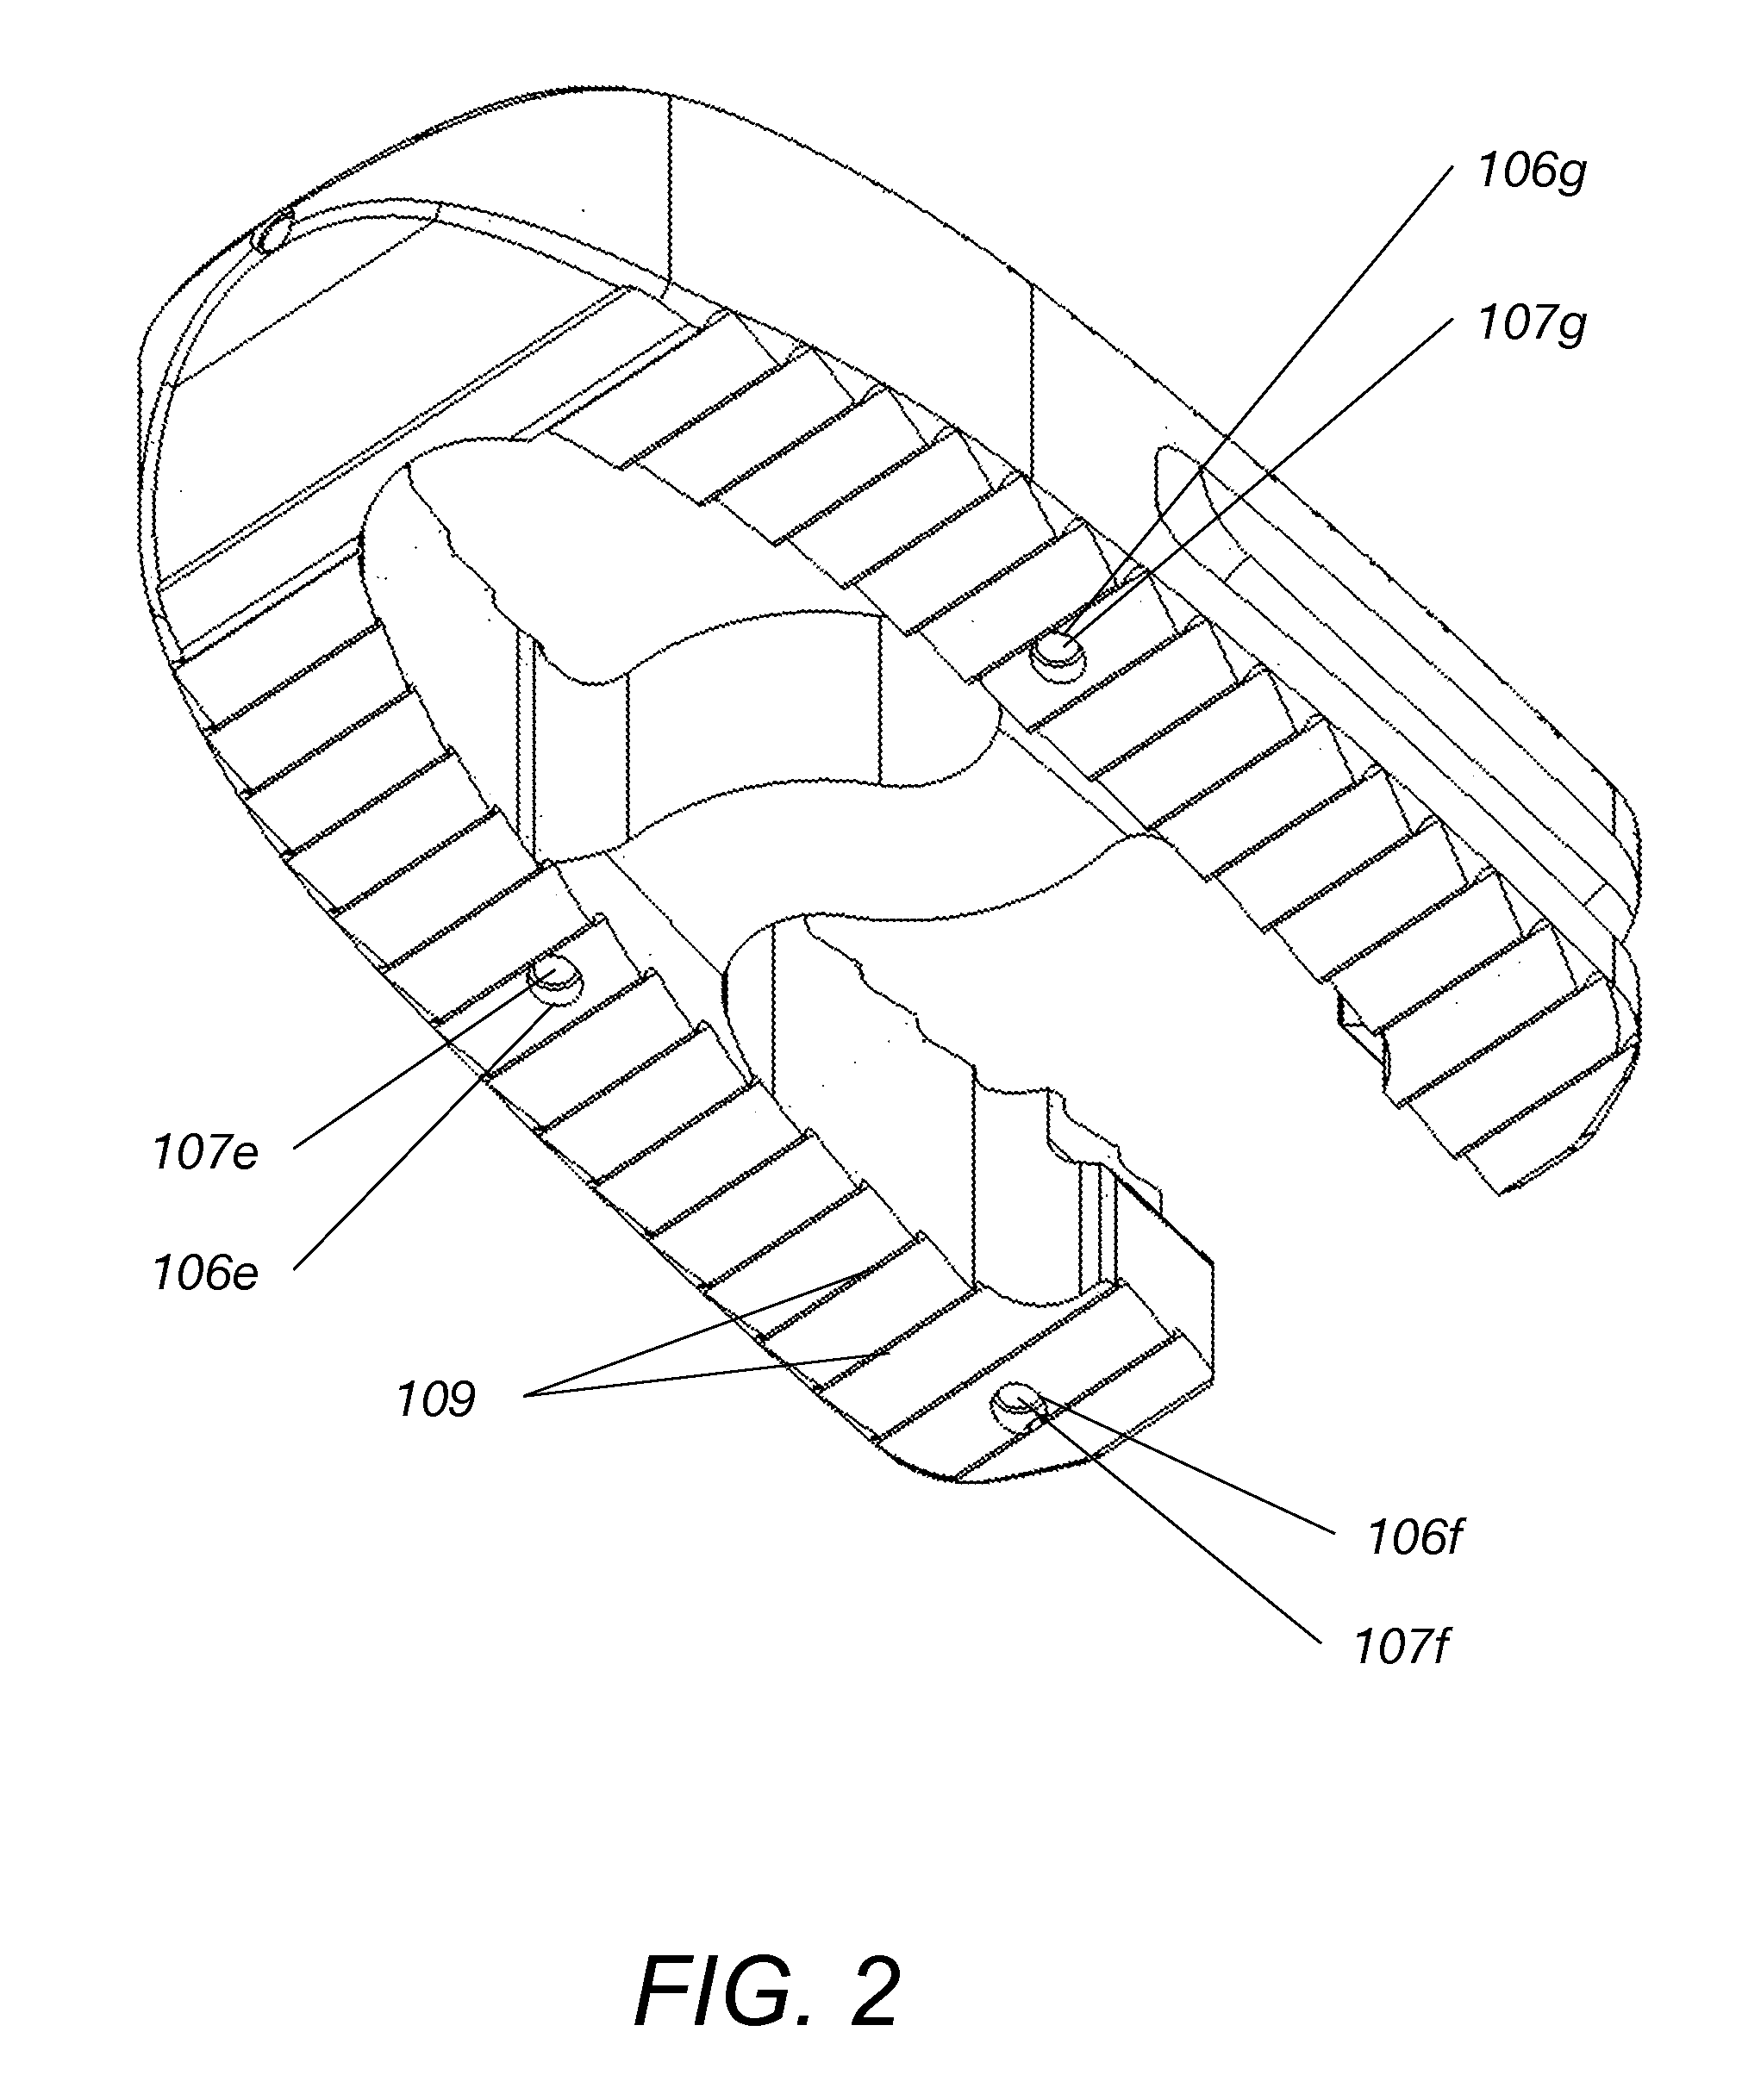 System and method for an intervertebral implant assembly